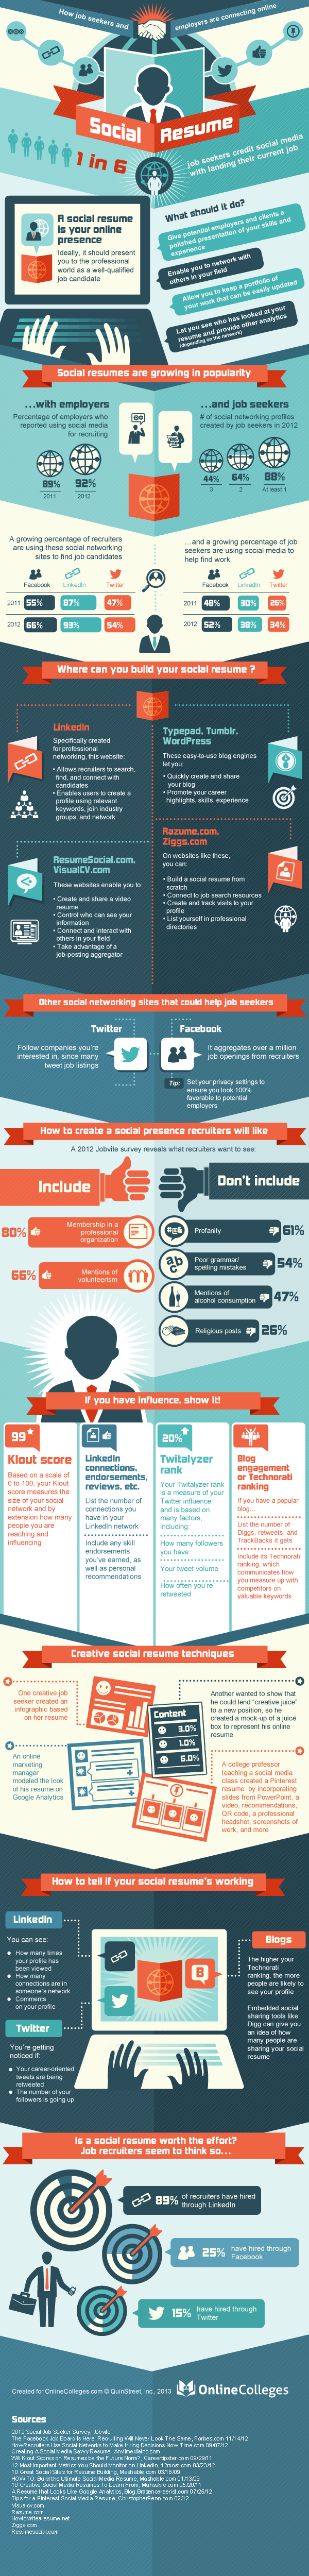 Social Resume Infographic